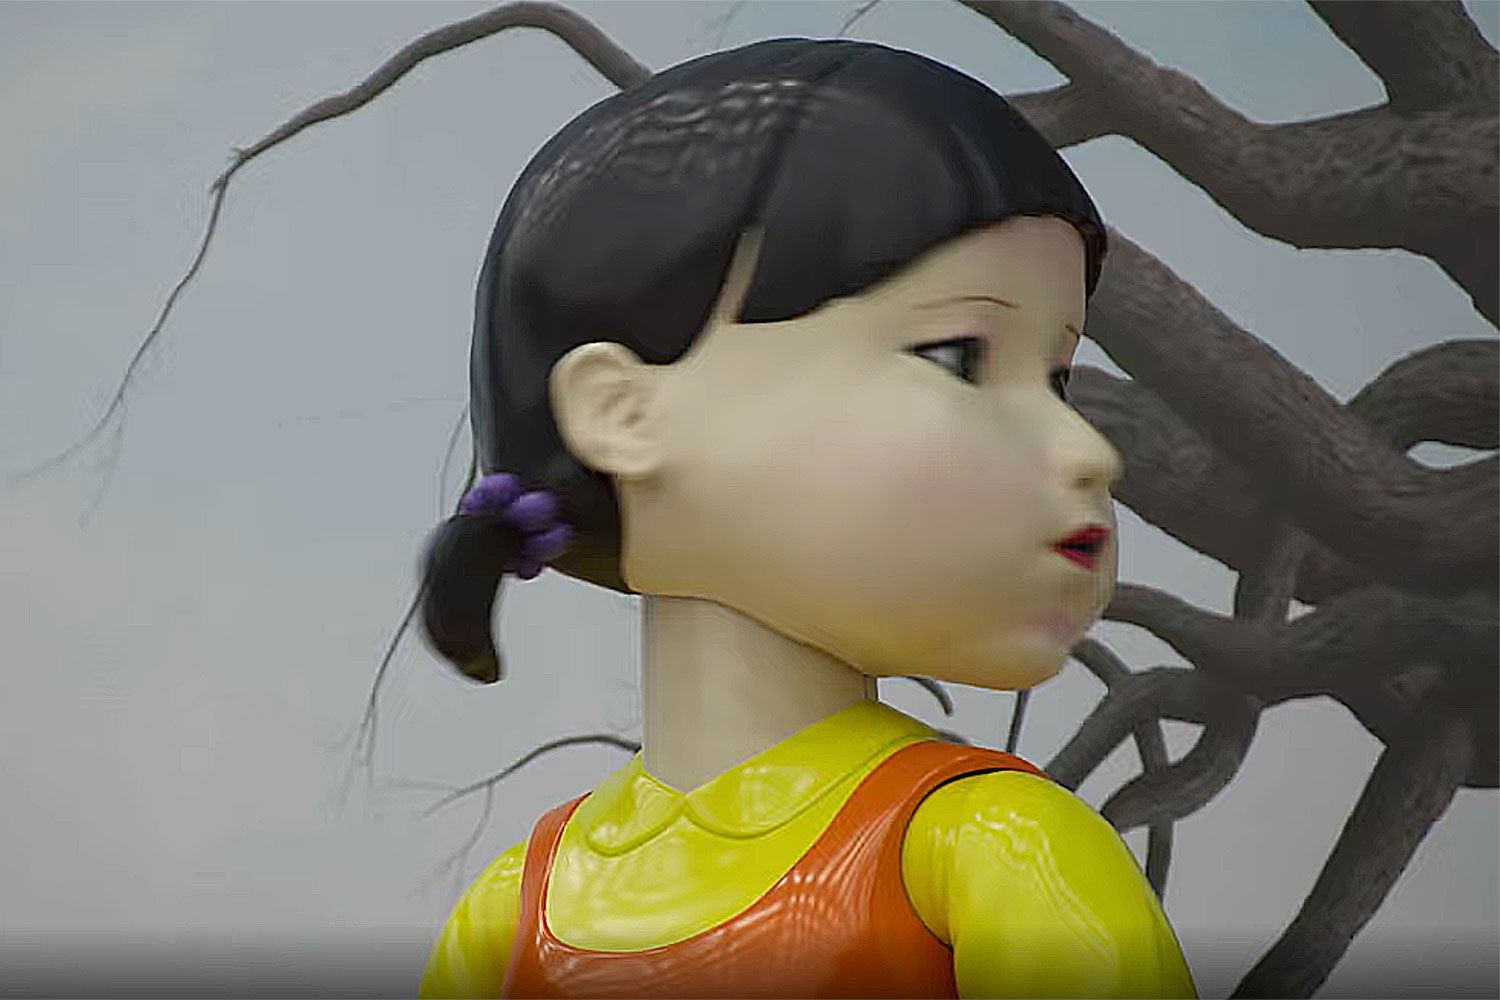 Robot doll from ‘Squid Game’ is back to haunt your dreams in teaser for new reality show